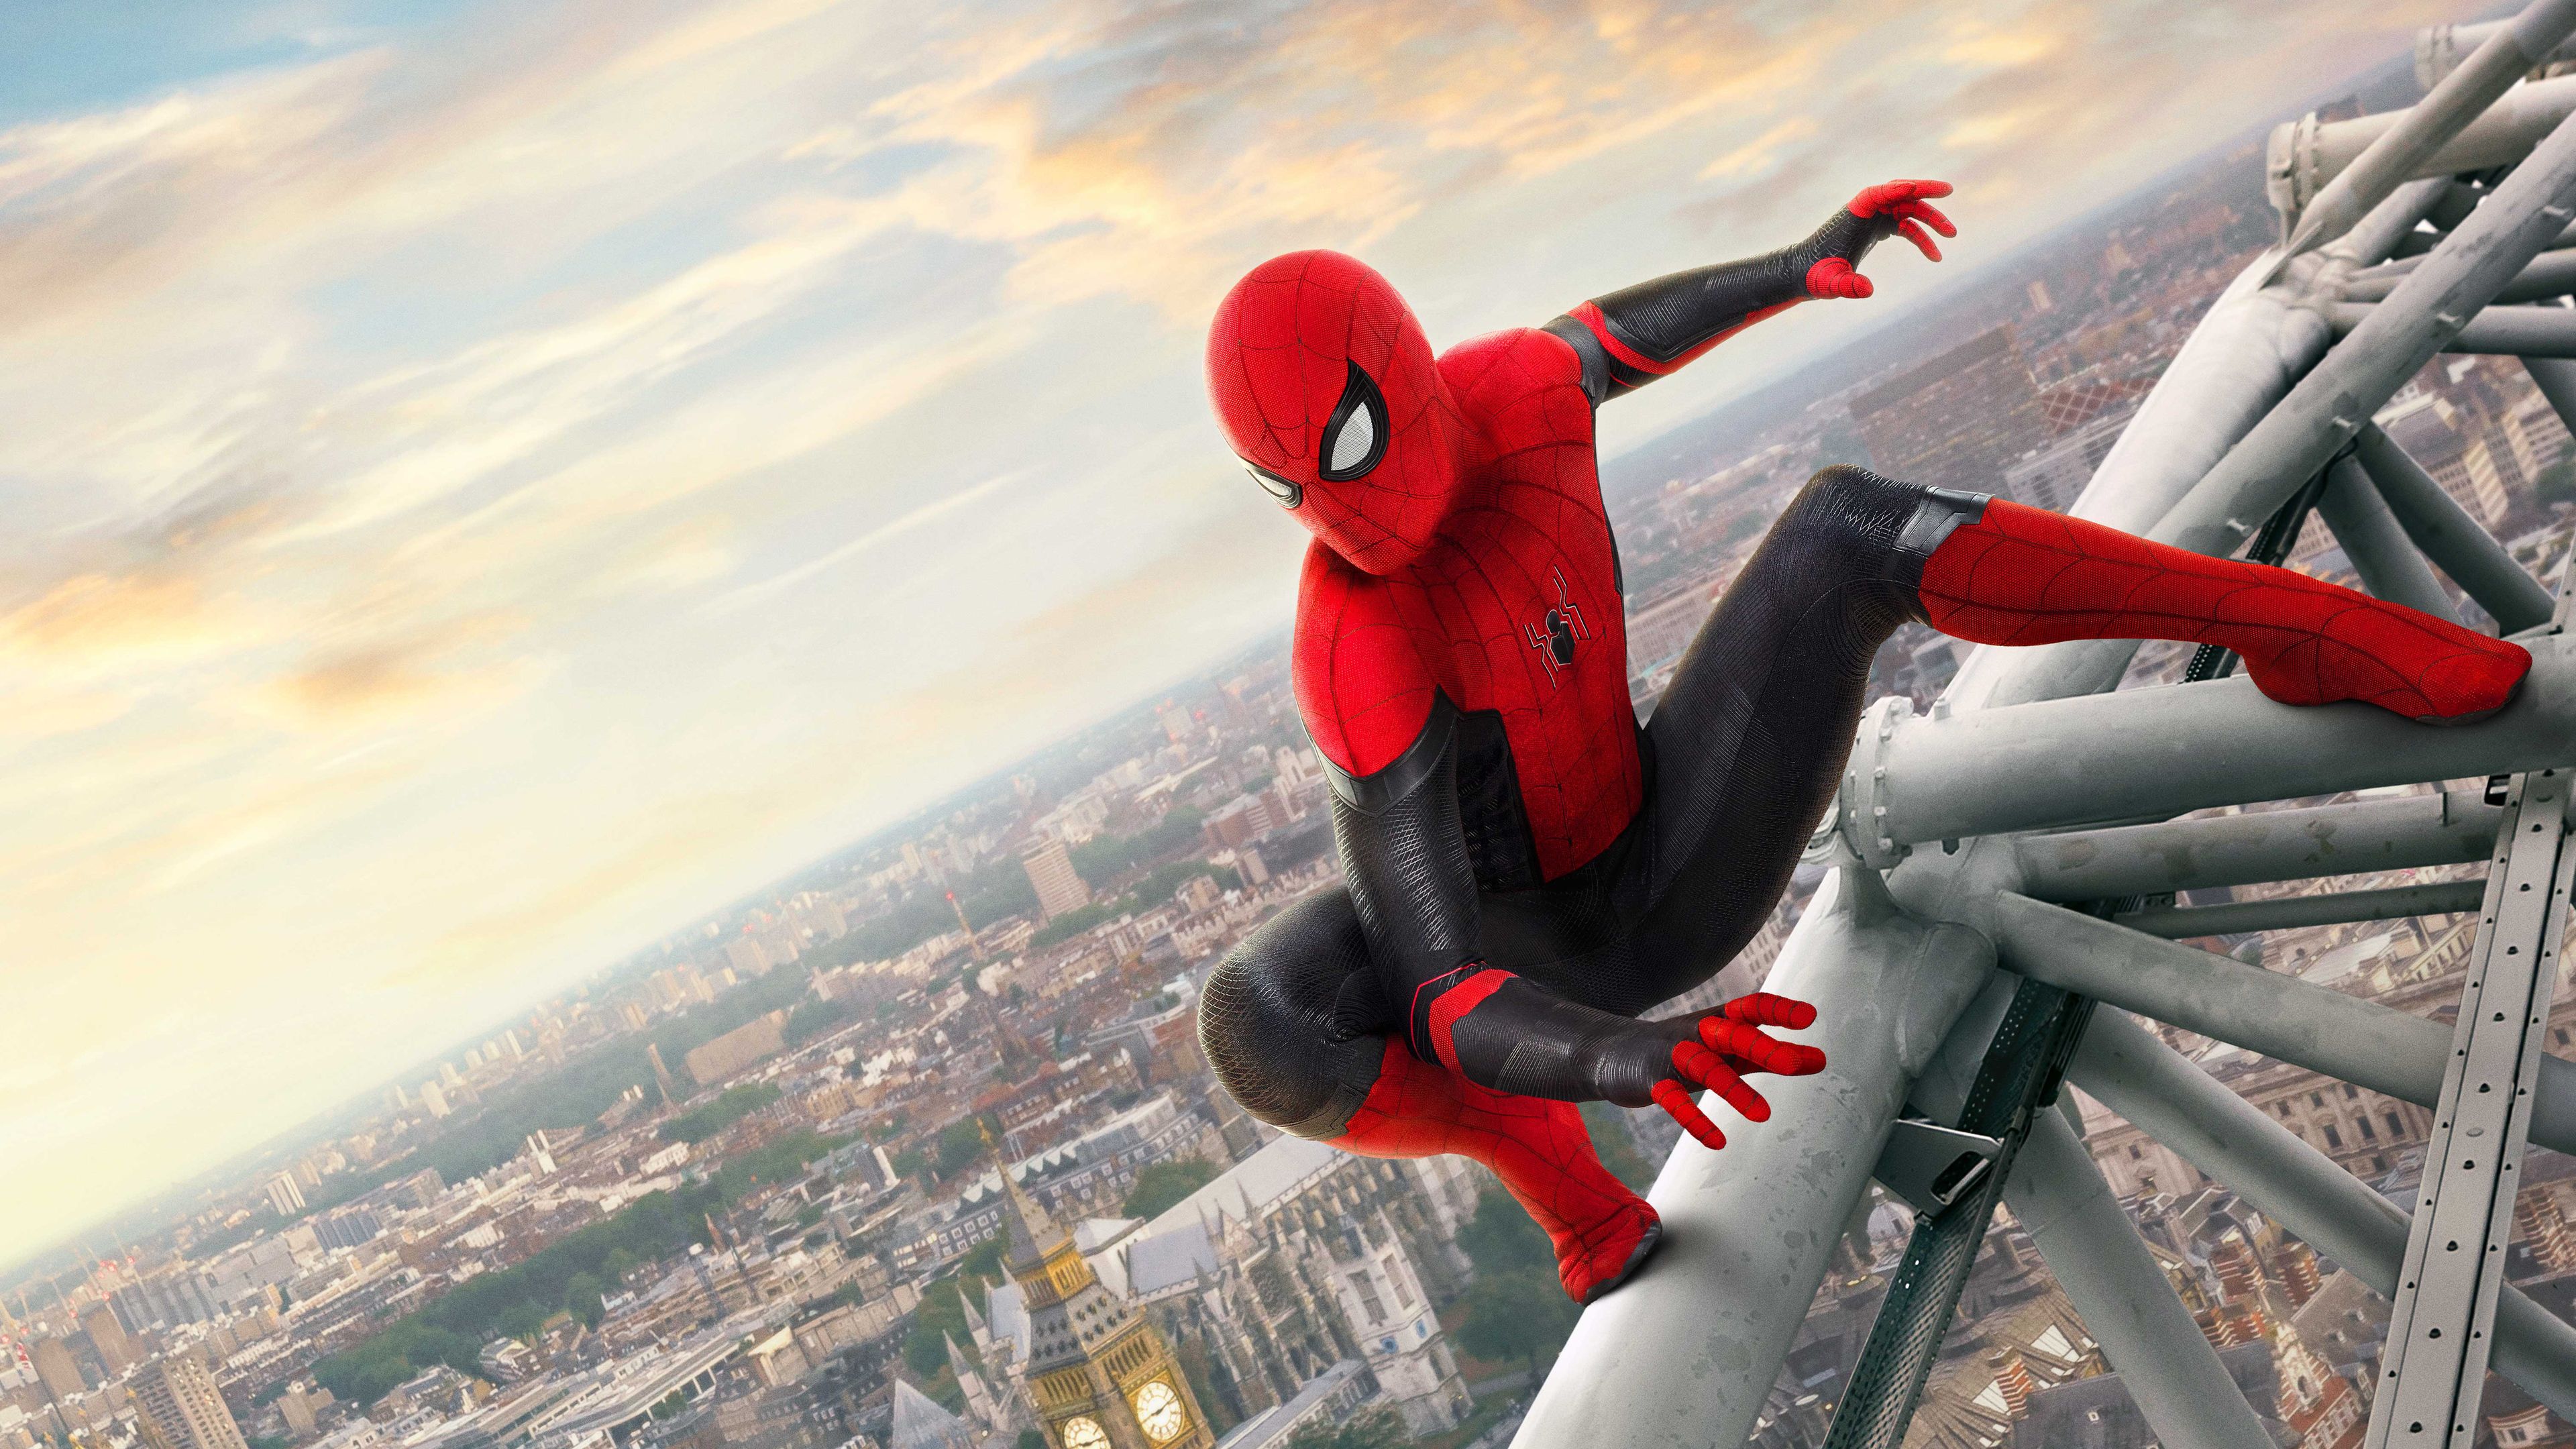 Spider Man Far From Home 2019 4k tom holland wallpaper, superheroes wallpaper, spiderman wallpaper, spider. Upcoming marvel movies, Marvel cinematic, Spiderman